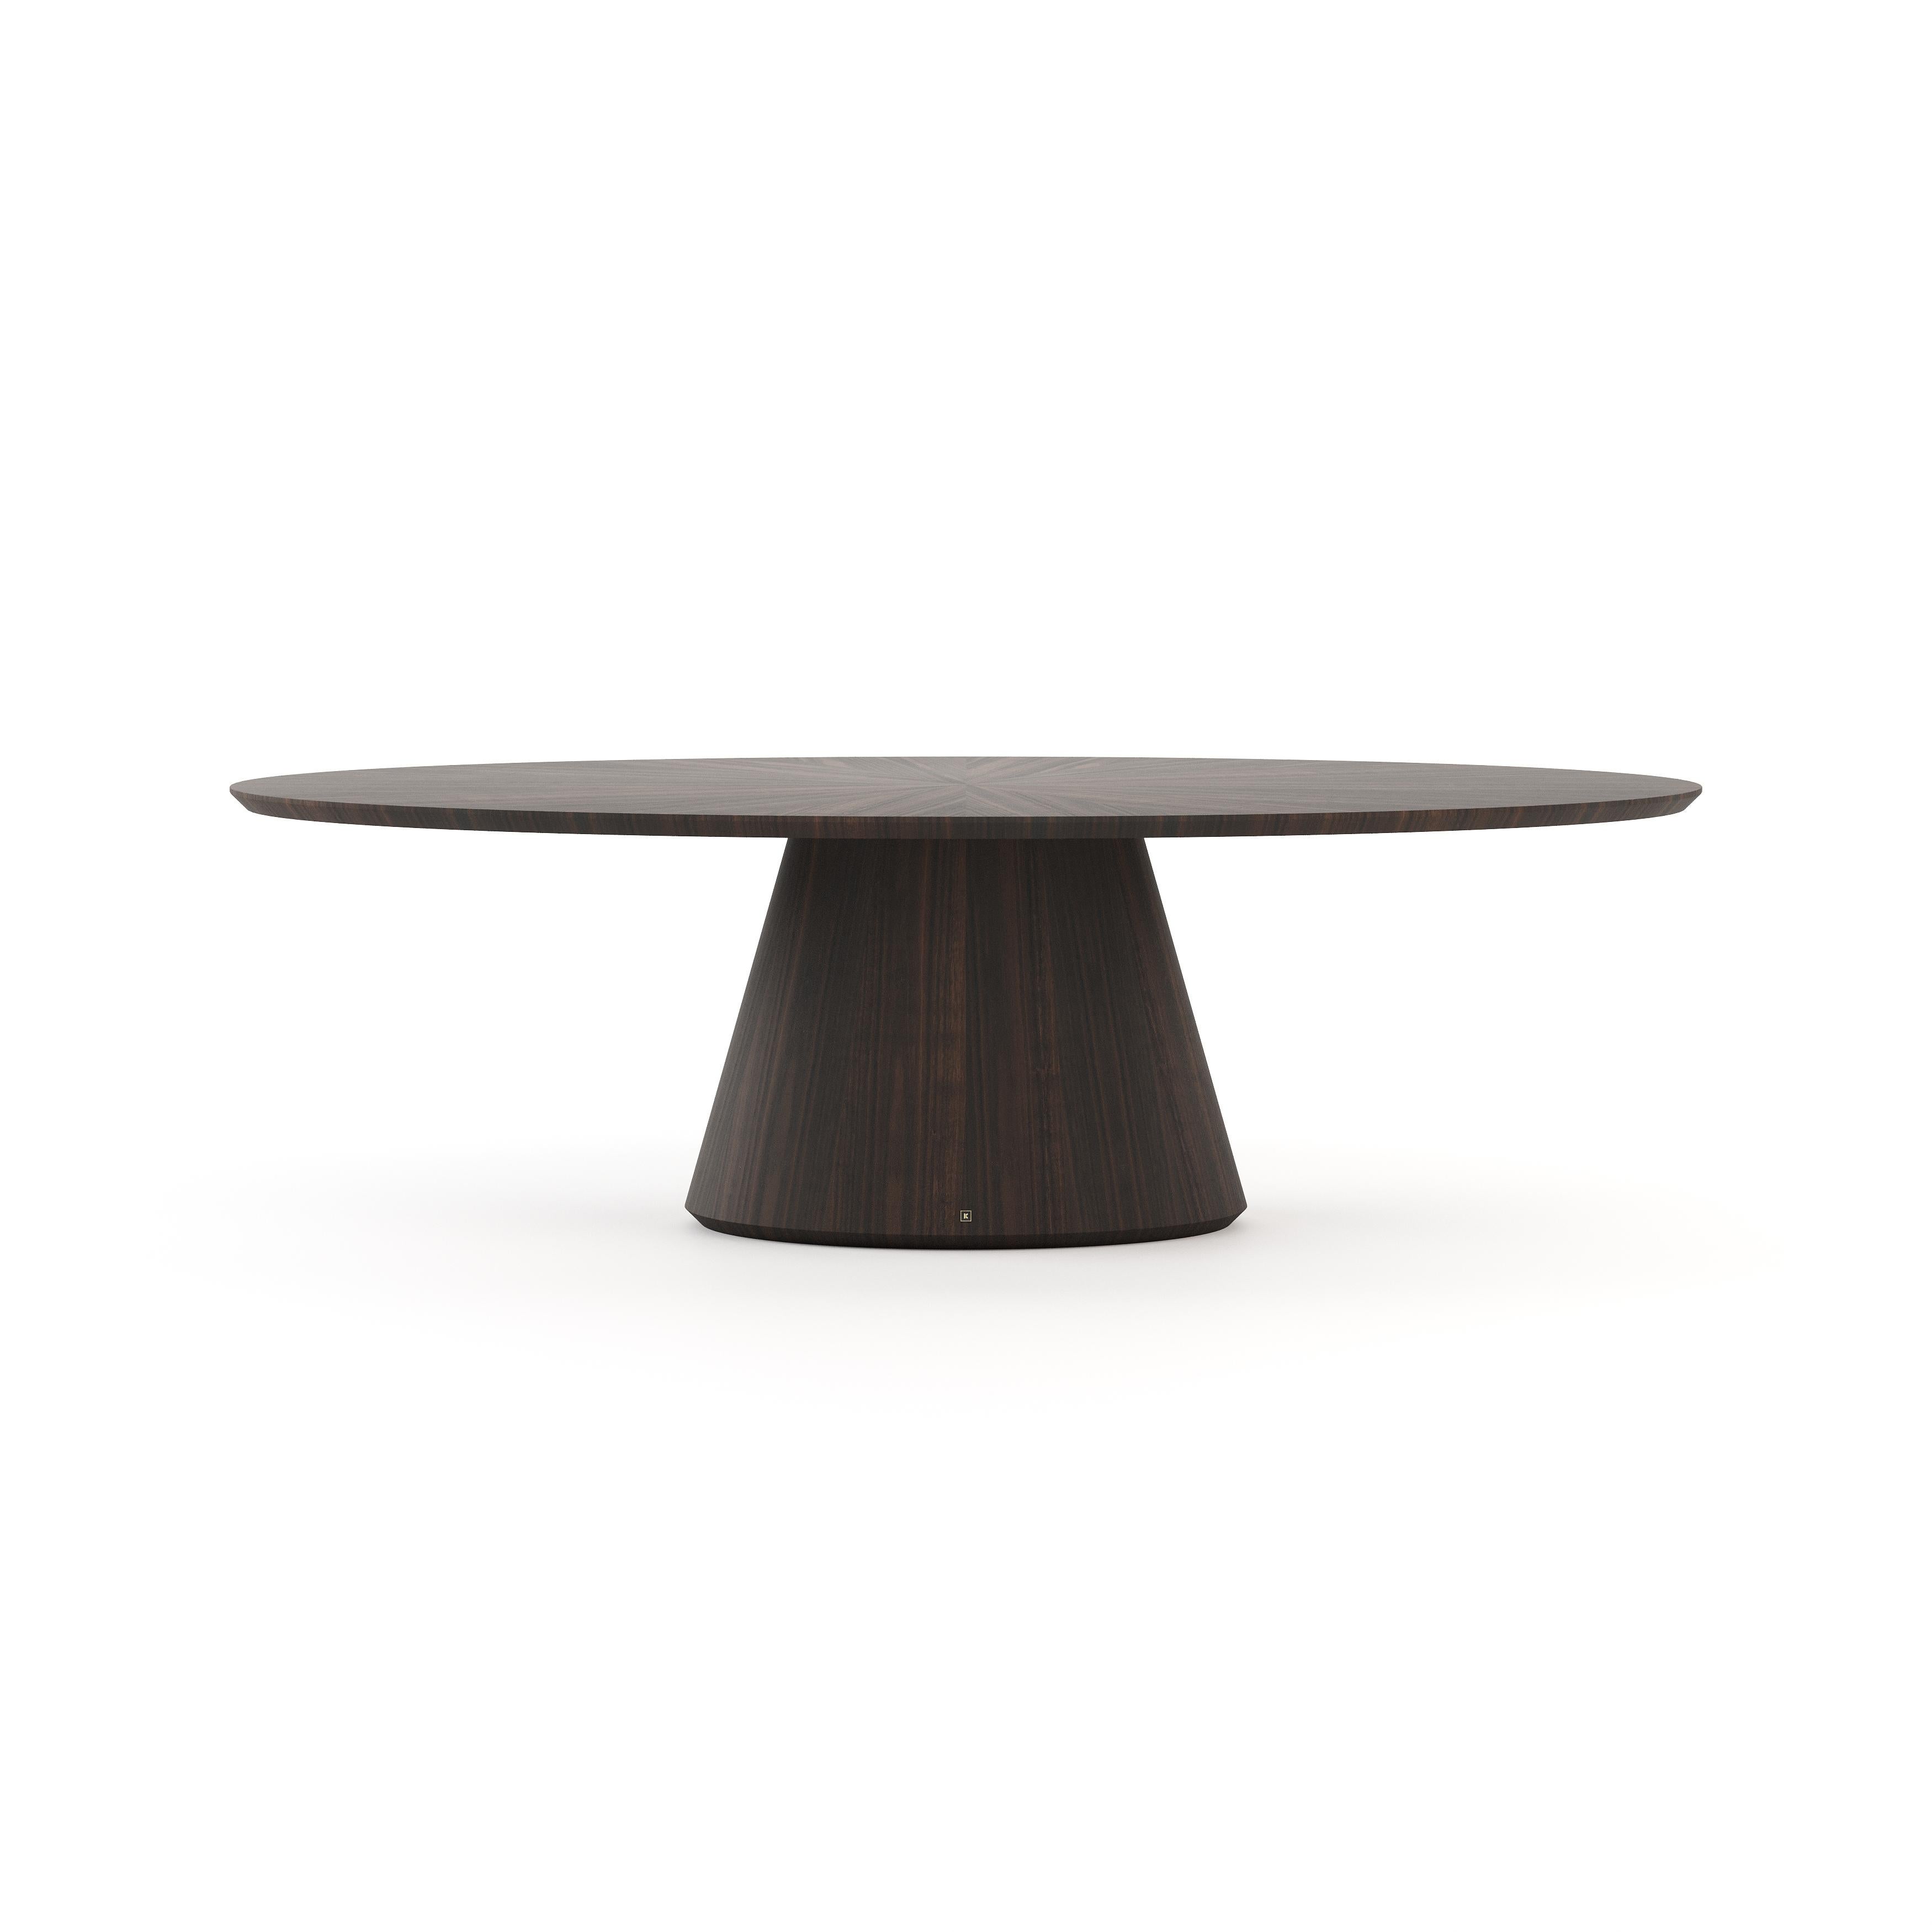 Kelly dining table holds a design that will stun you. This oval dining table is an eccentric piece conceived for extravagant dining rooms. The perfect addition for luxury restaurants and exclusive dining areas. Playing with function and design, its